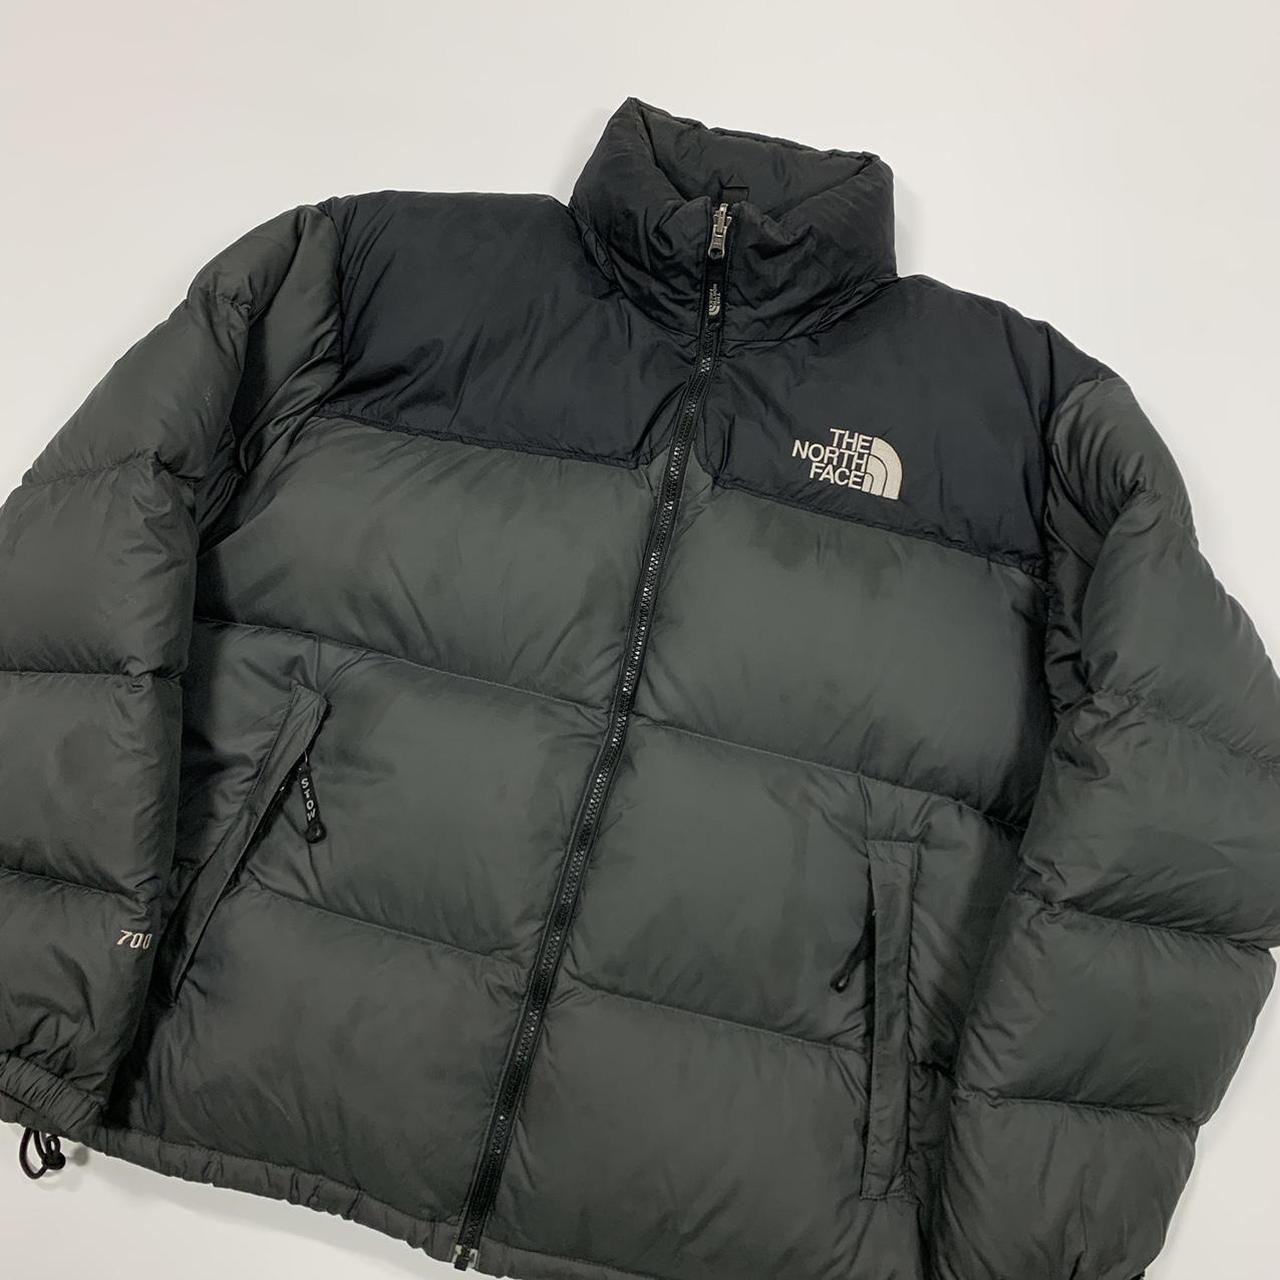 Product Image 3 - The North Face Nuptse 700